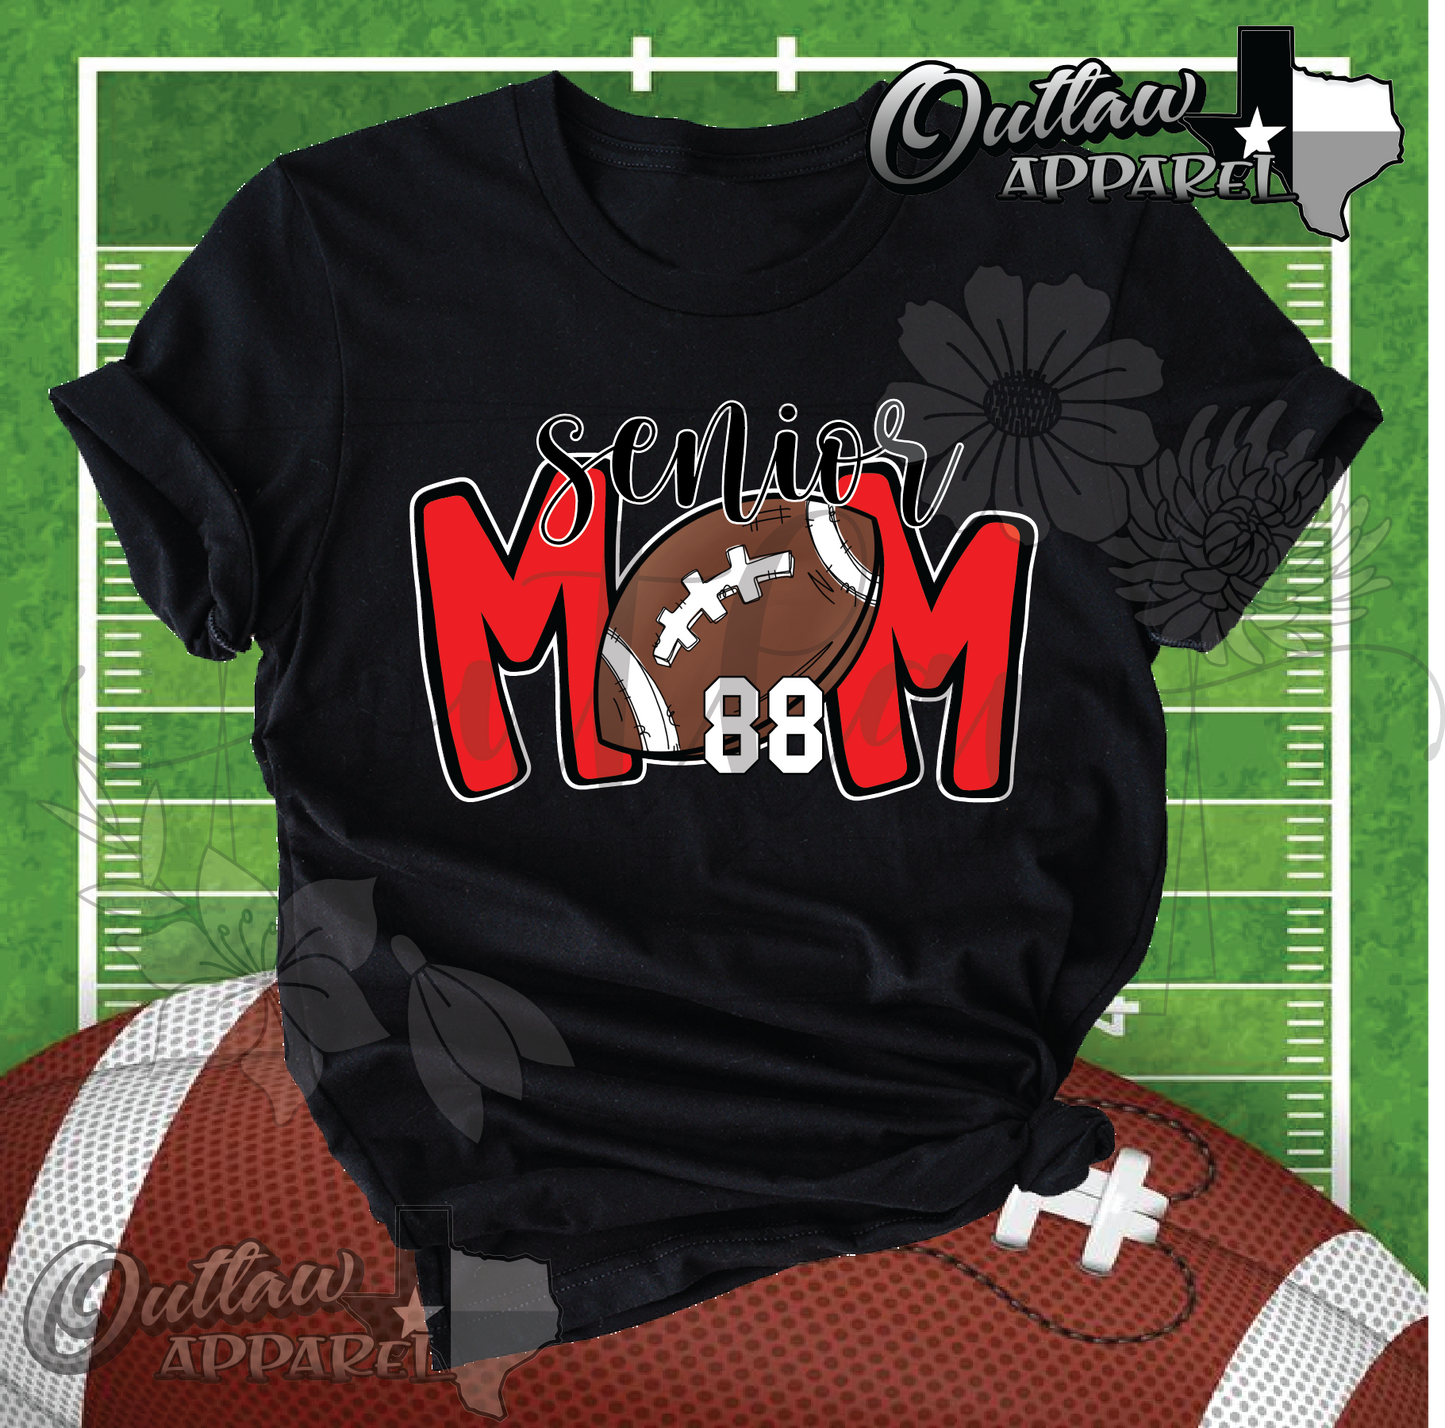 Outlaw Apparel Senior Football Mom with Number